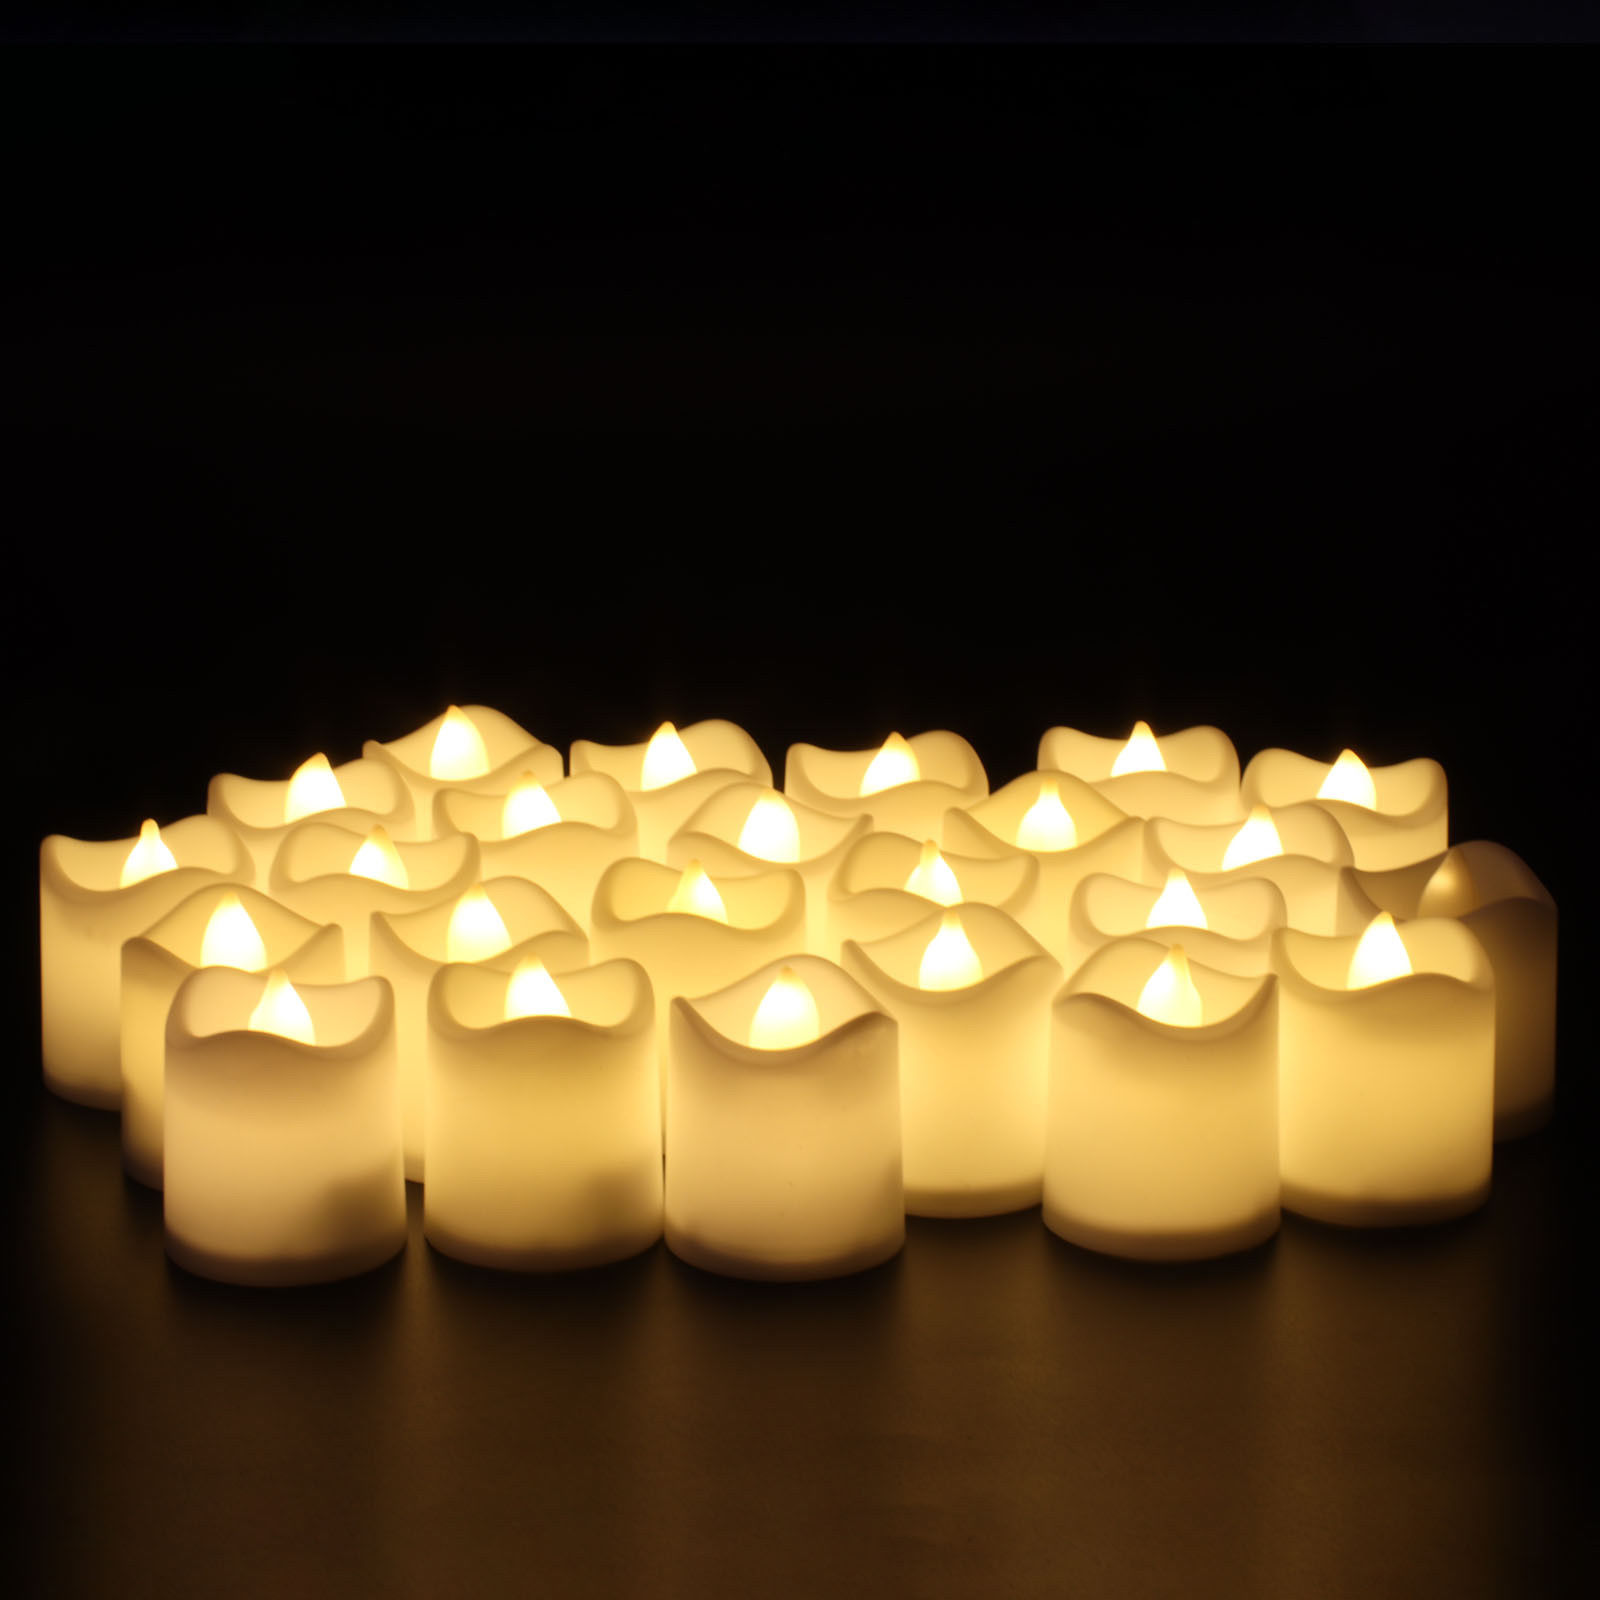 24/48/72/96PC Flameless Votive Candles Battery Operated Flickering LED Tea Light 